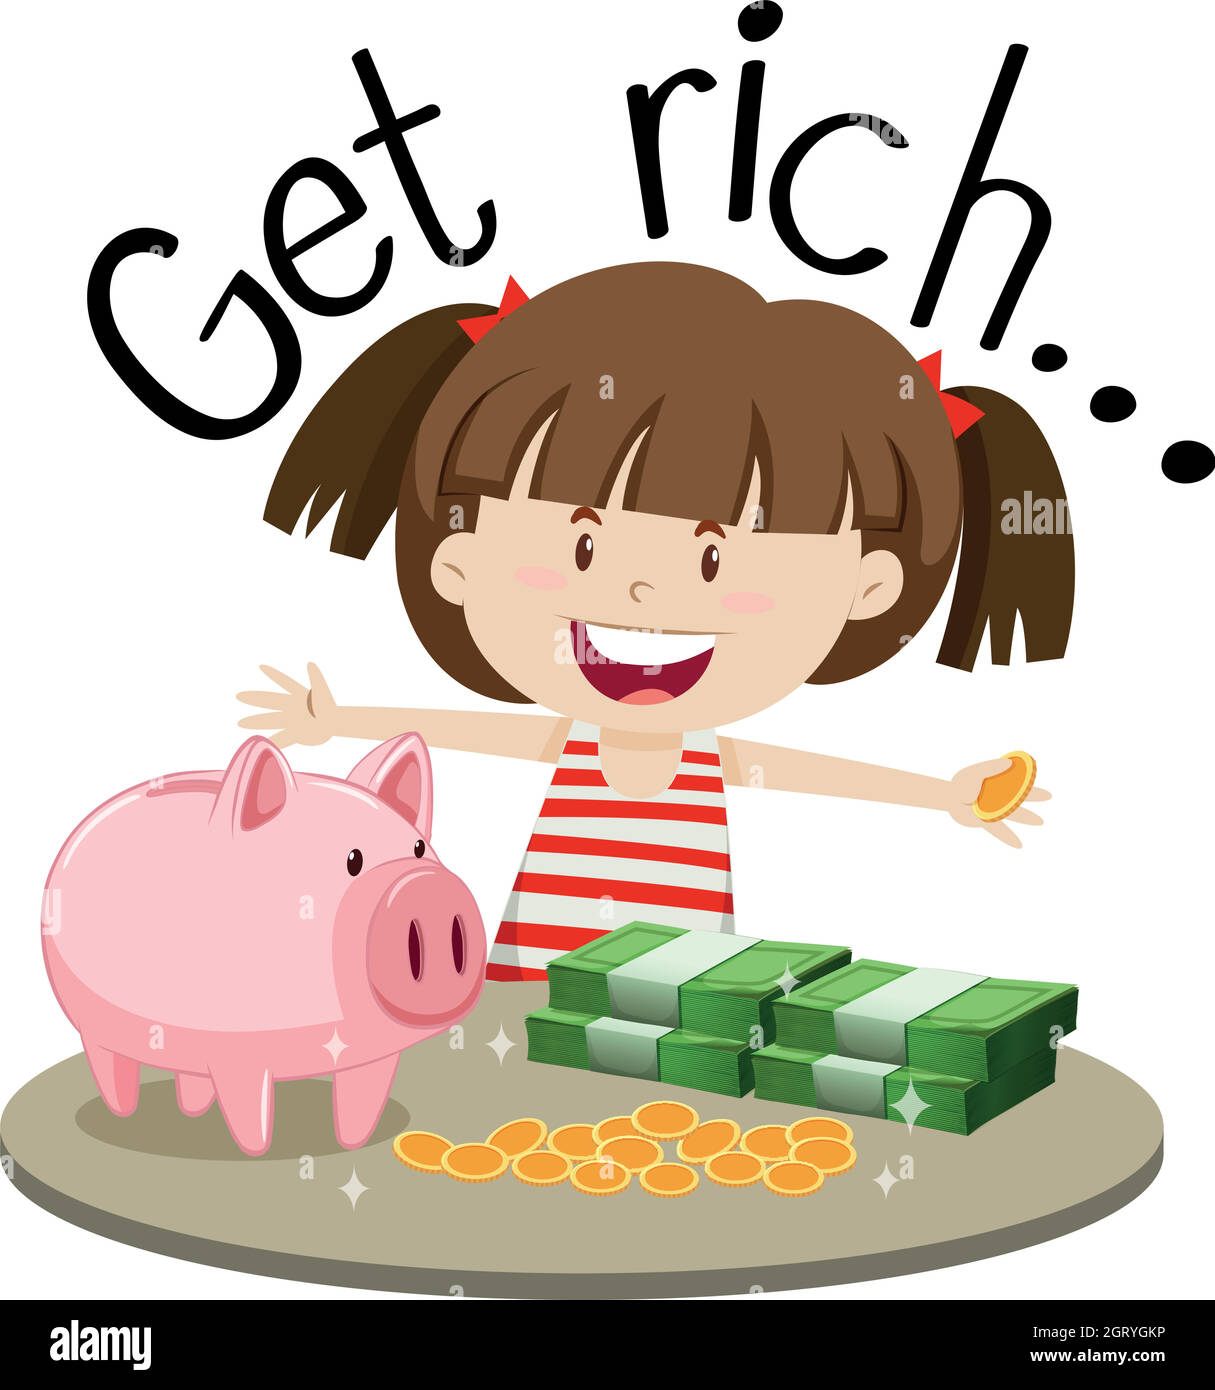 English phrase for get rich with girl and money on table Stock Vector